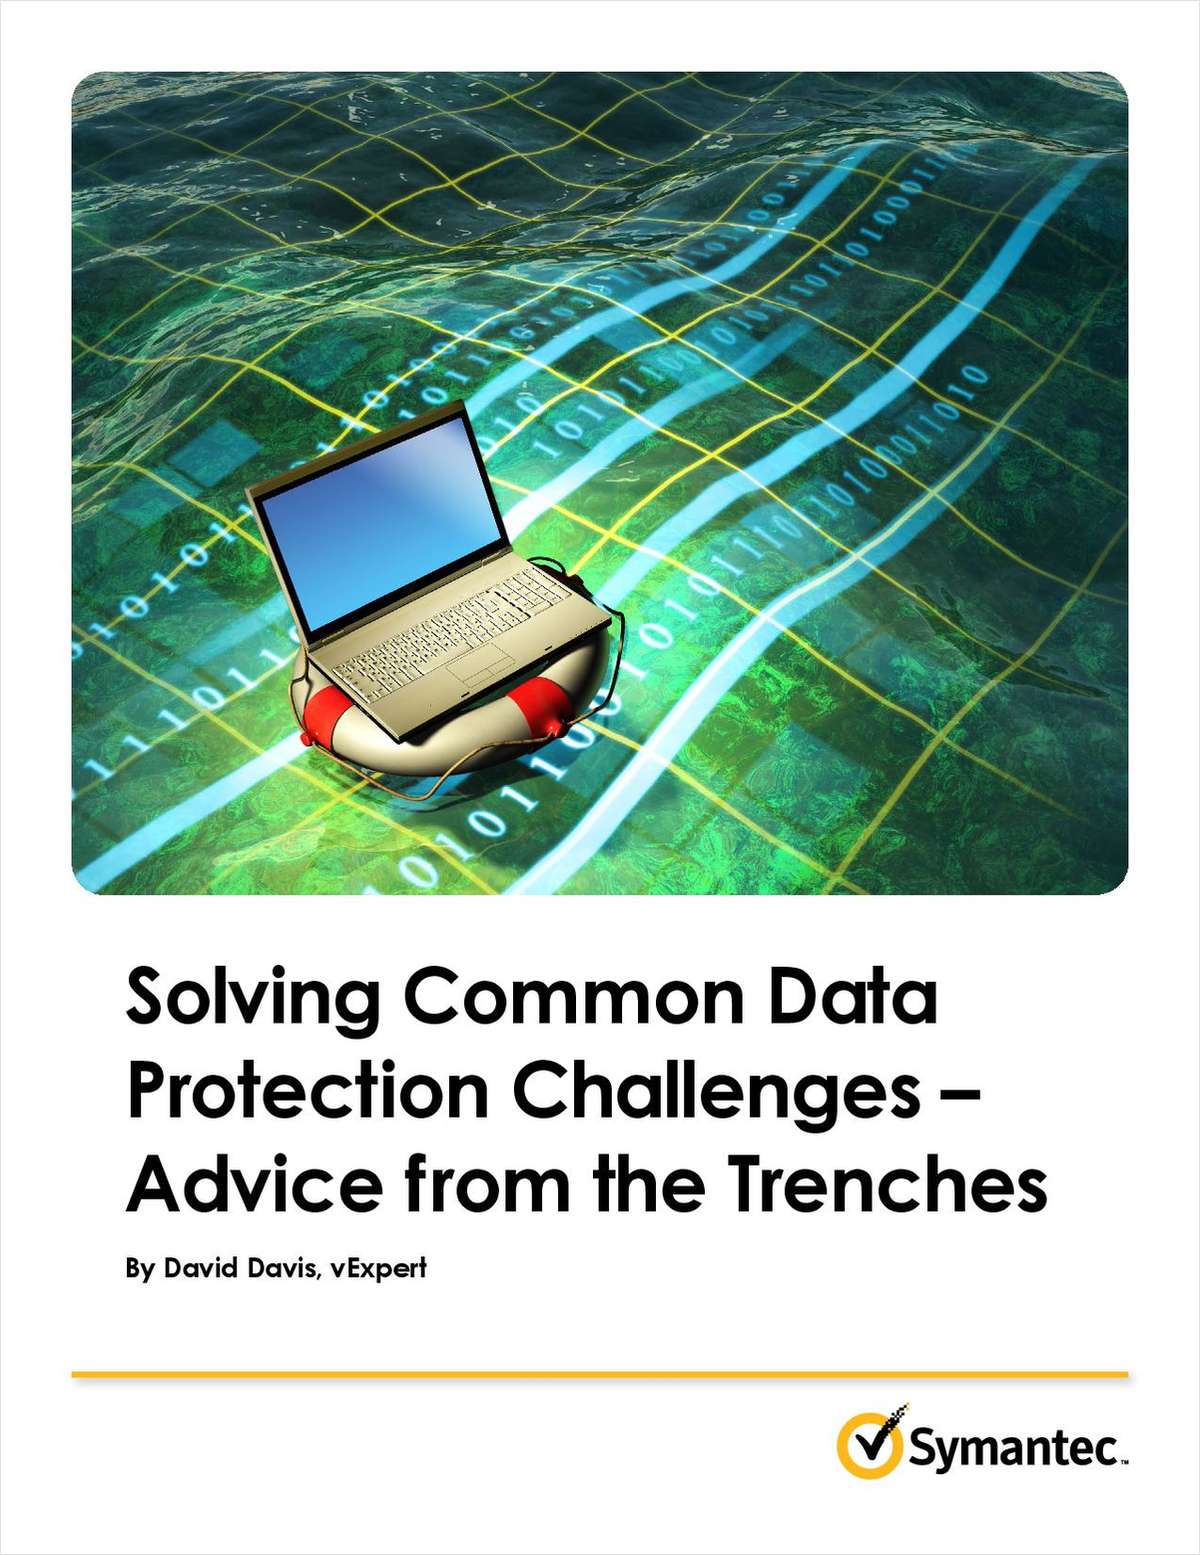 Solving Common Data Protection Challenges - Advice from the Trenches